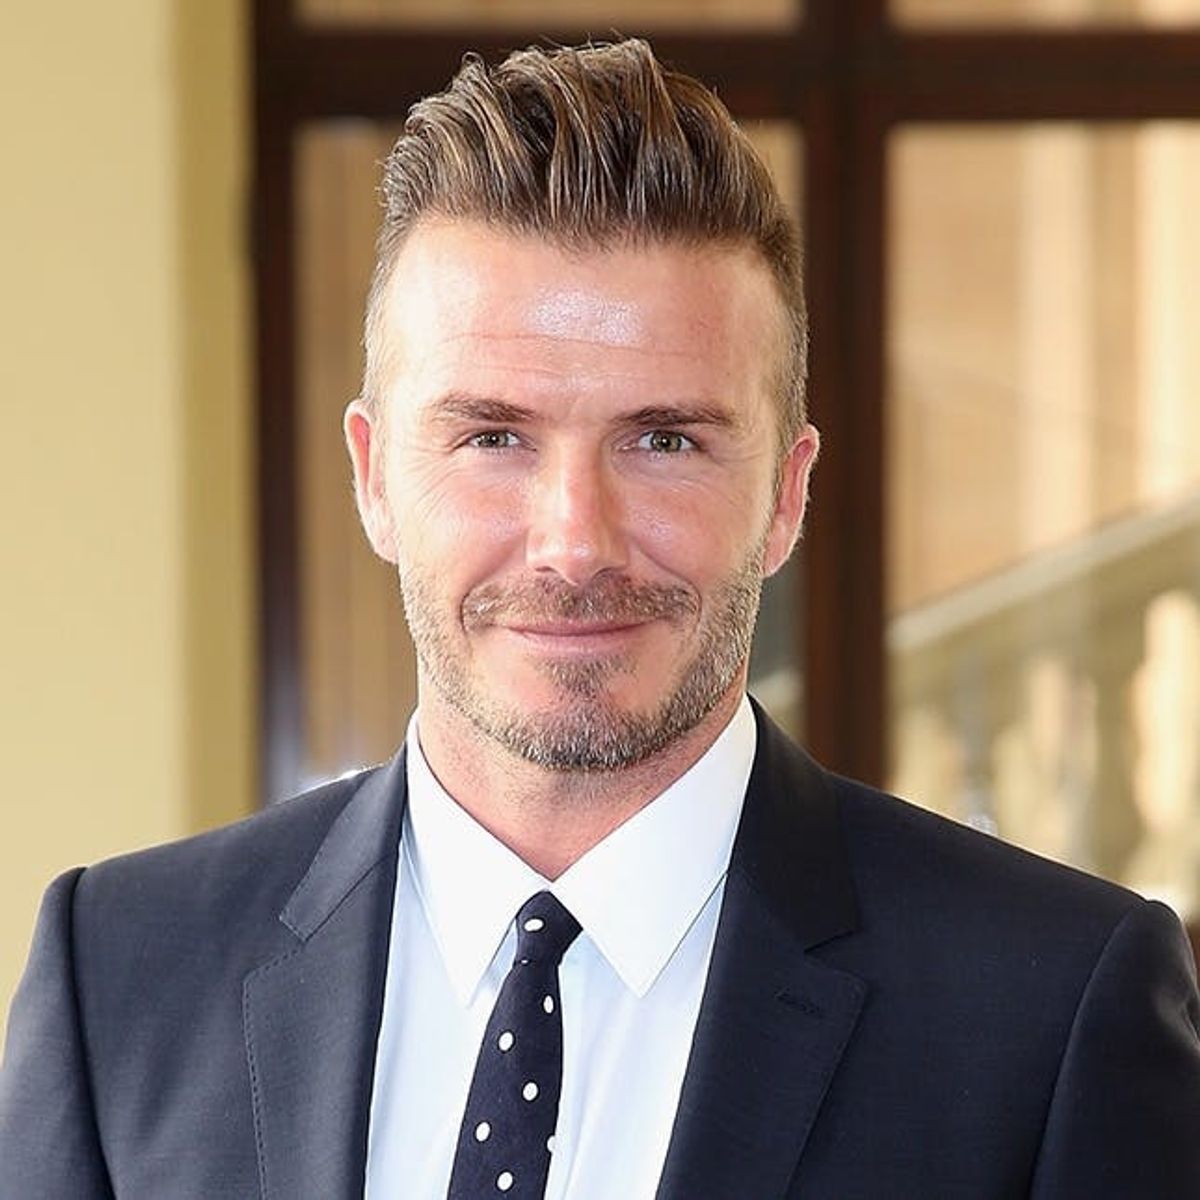 You’ll Never Guess Who’s Twinning With David Beckham - Brit + Co